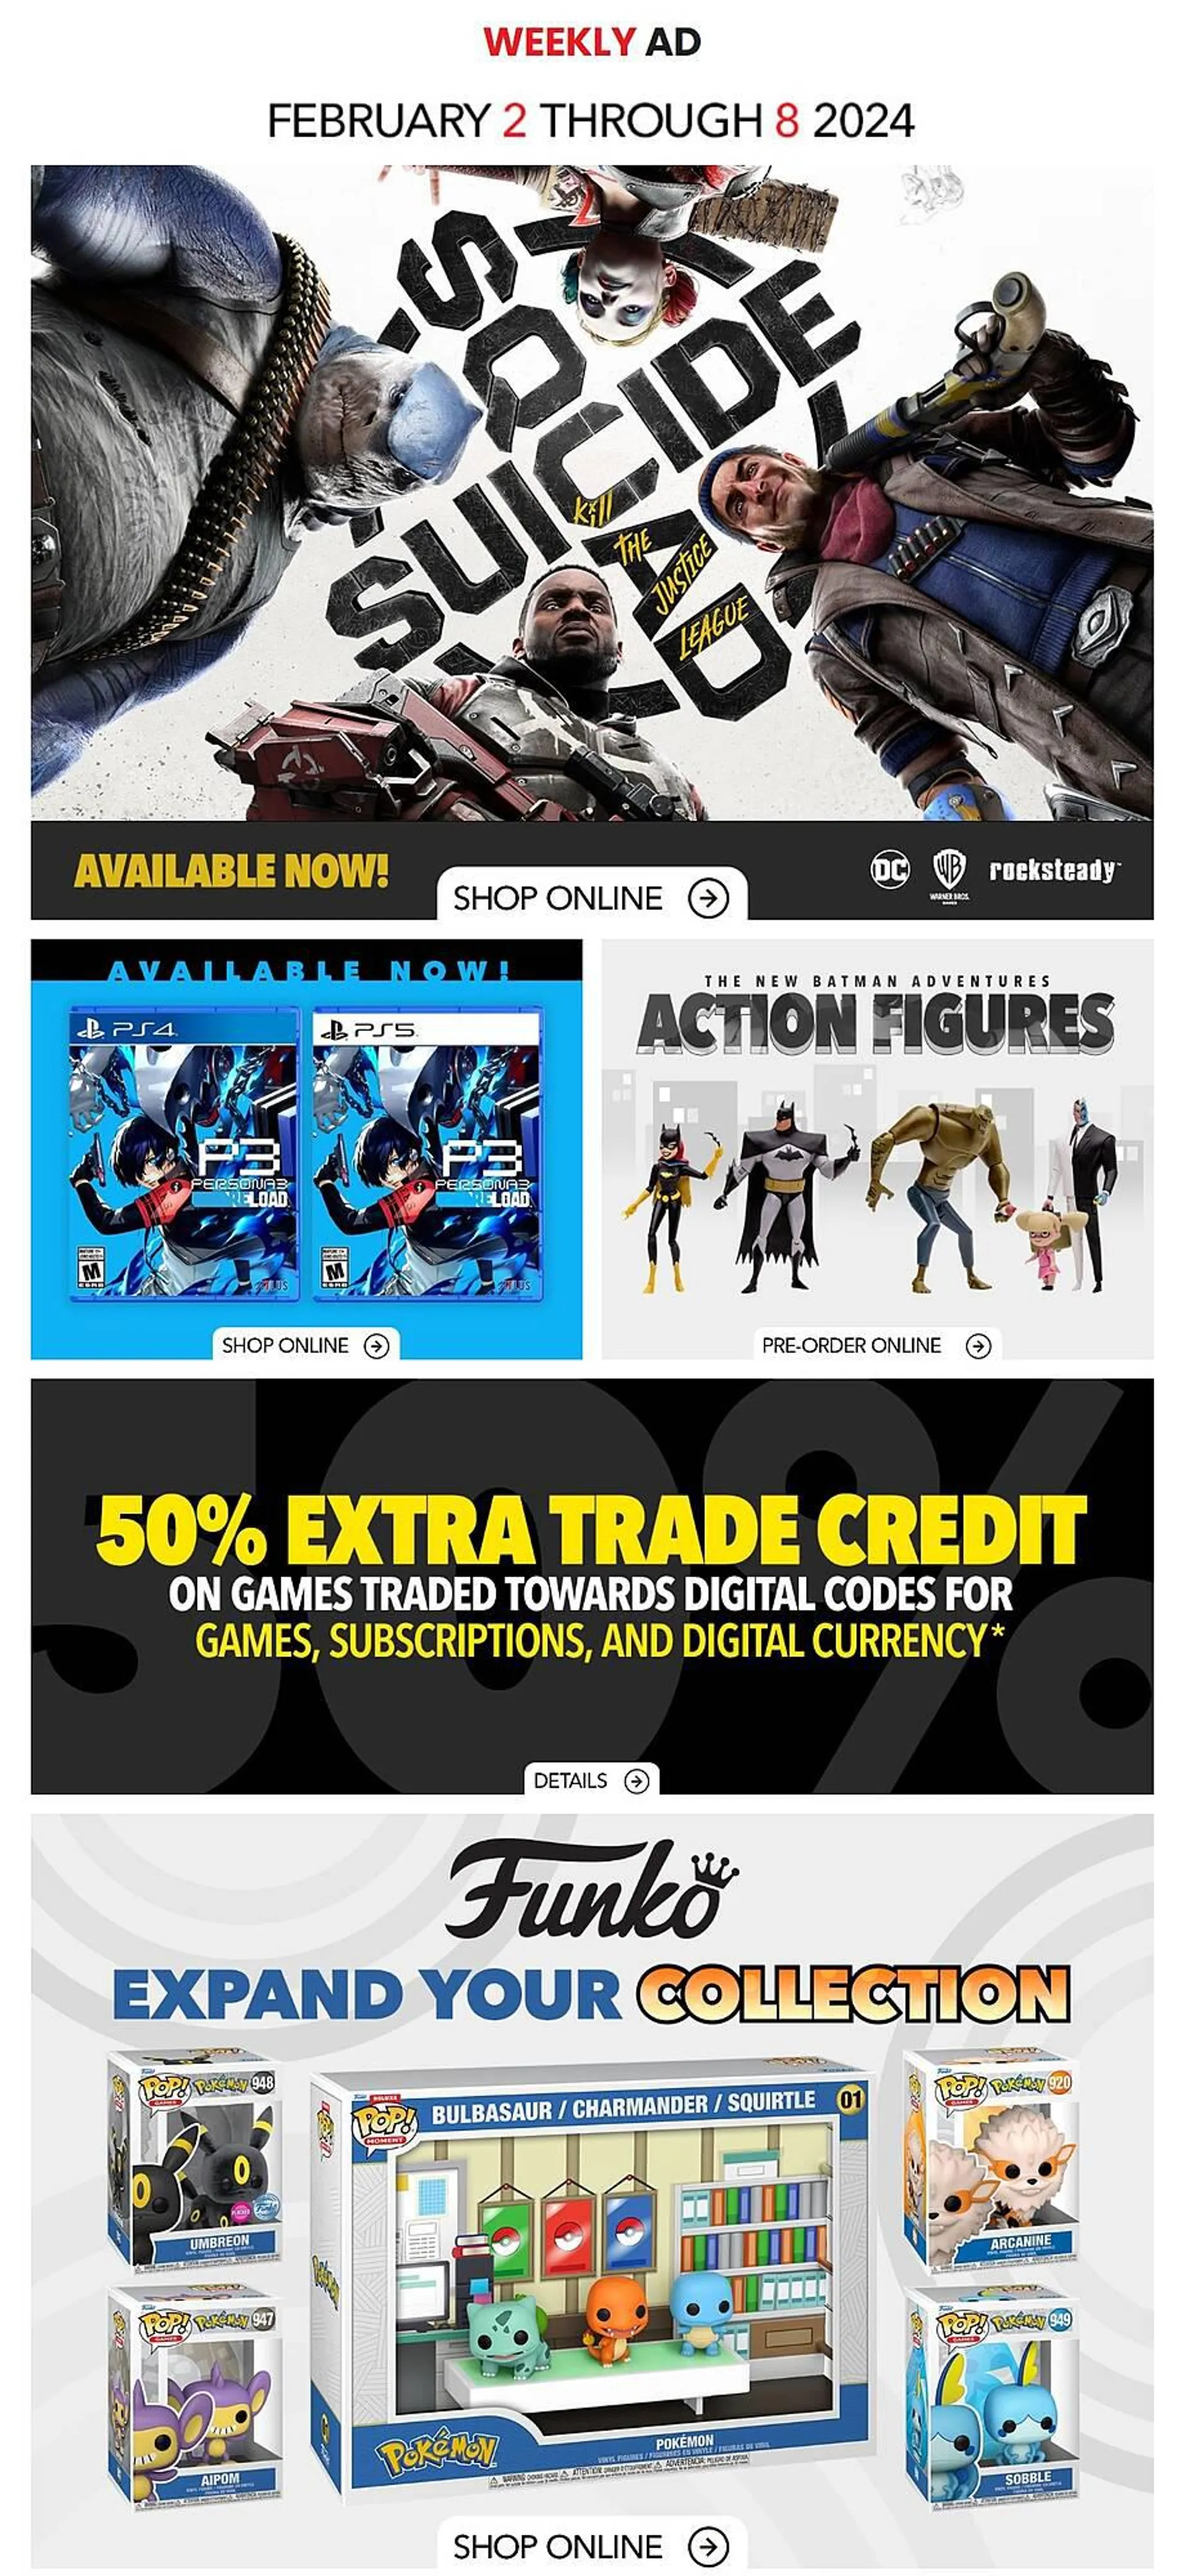 GameStop flyer from February 2 to February 8 2024 - flyer page 